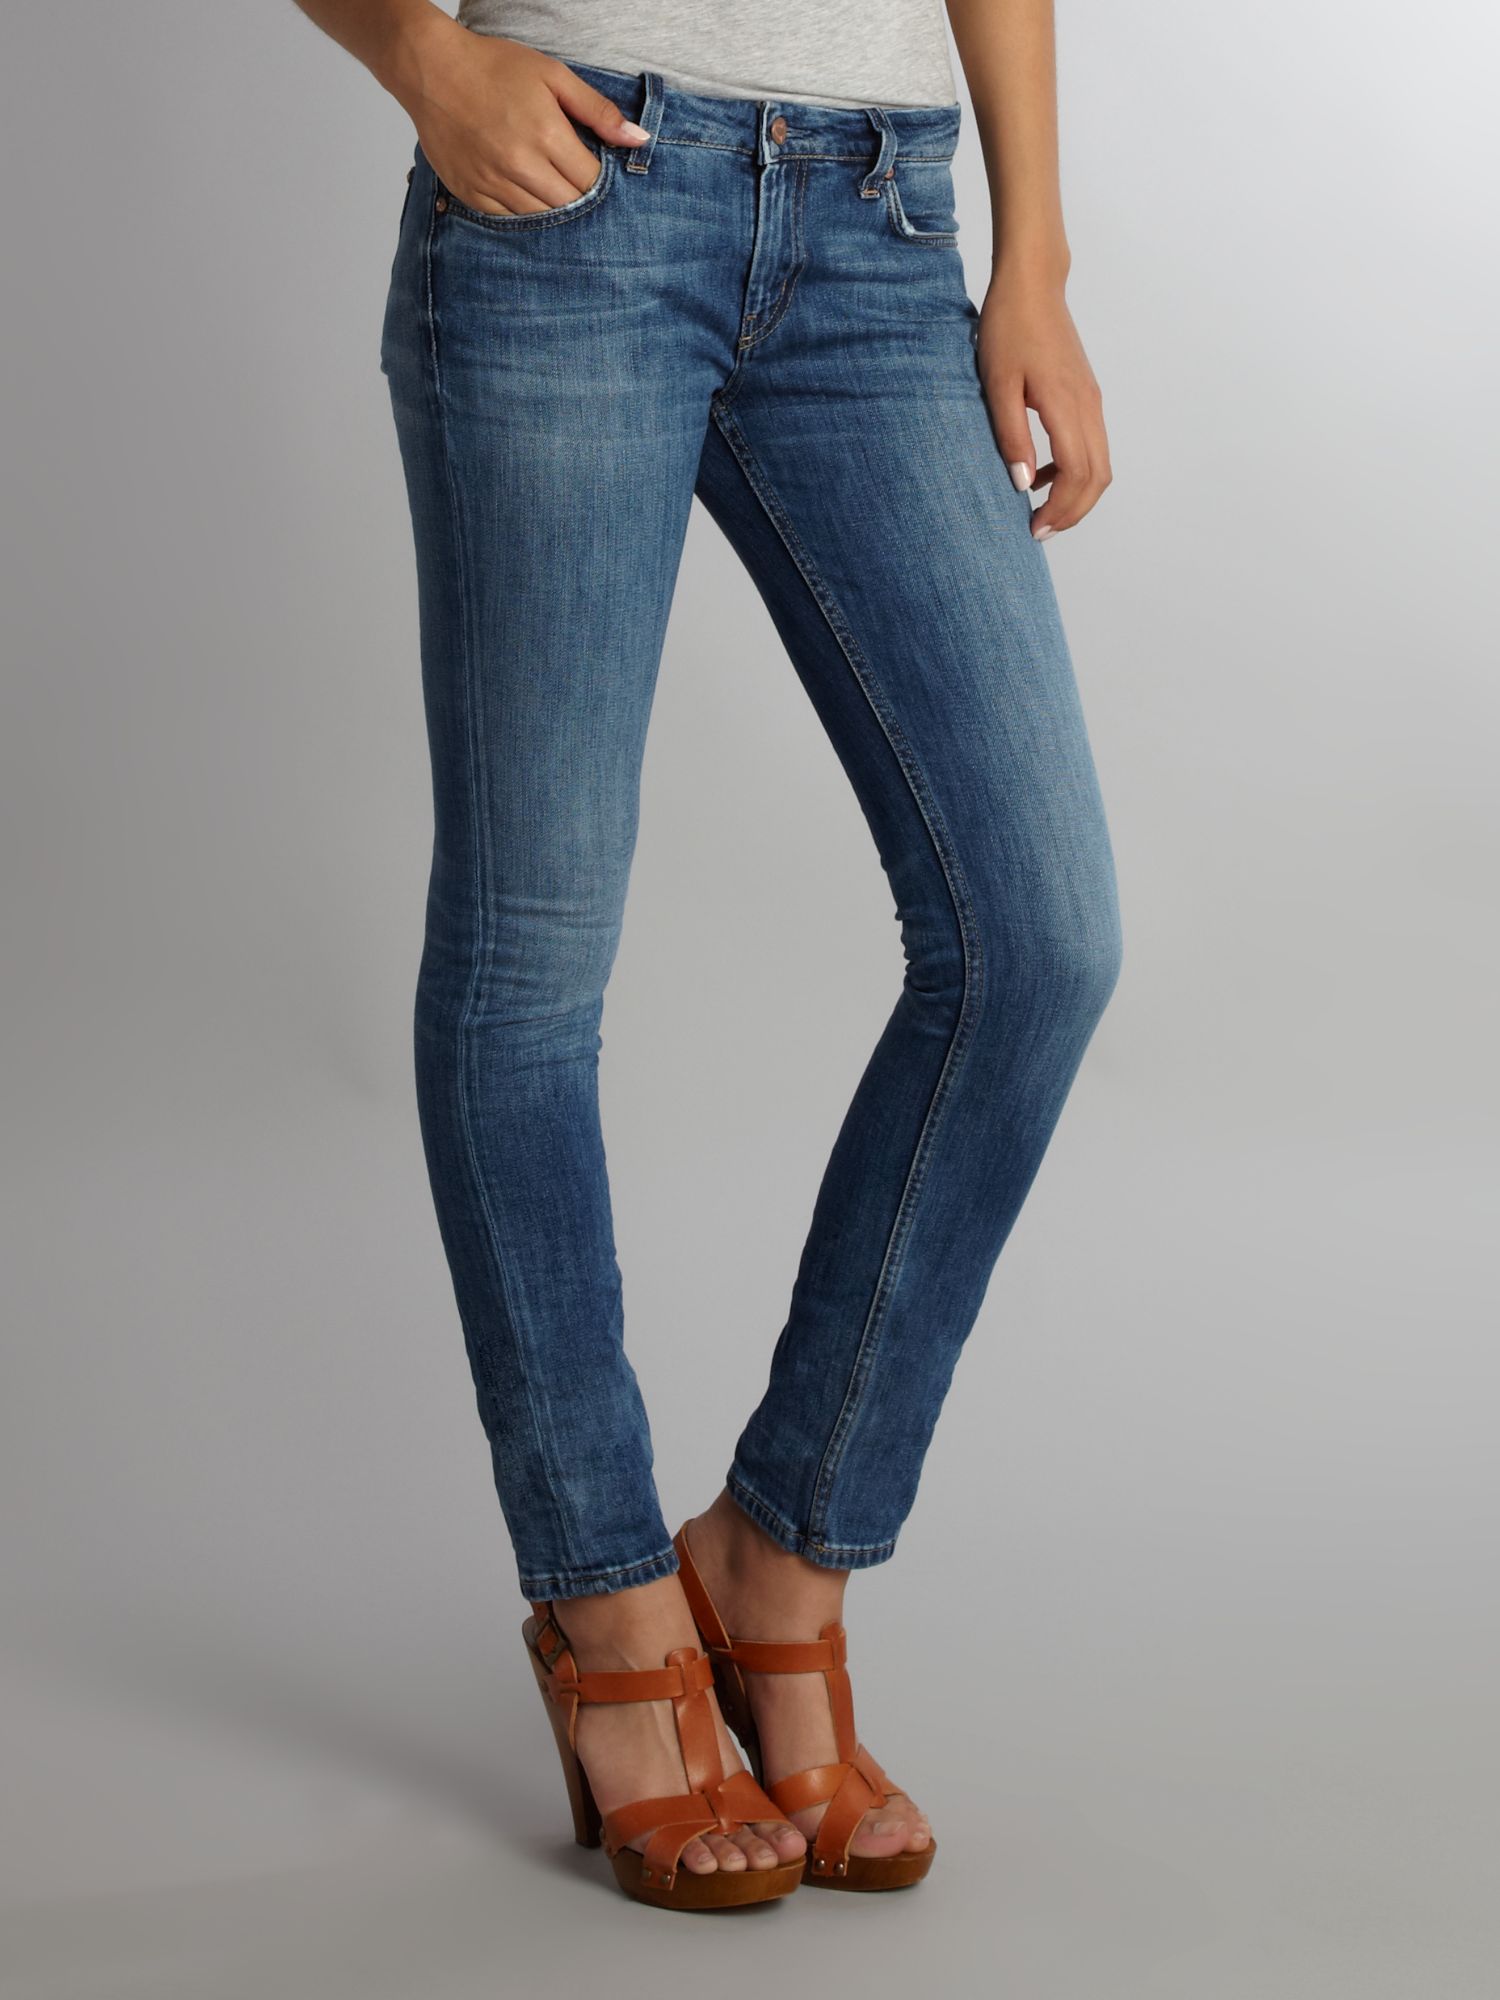 M.i.h Jeans Skinny Low Rise Breathless Jean in Denim Mid Wash (Blue) - Lyst